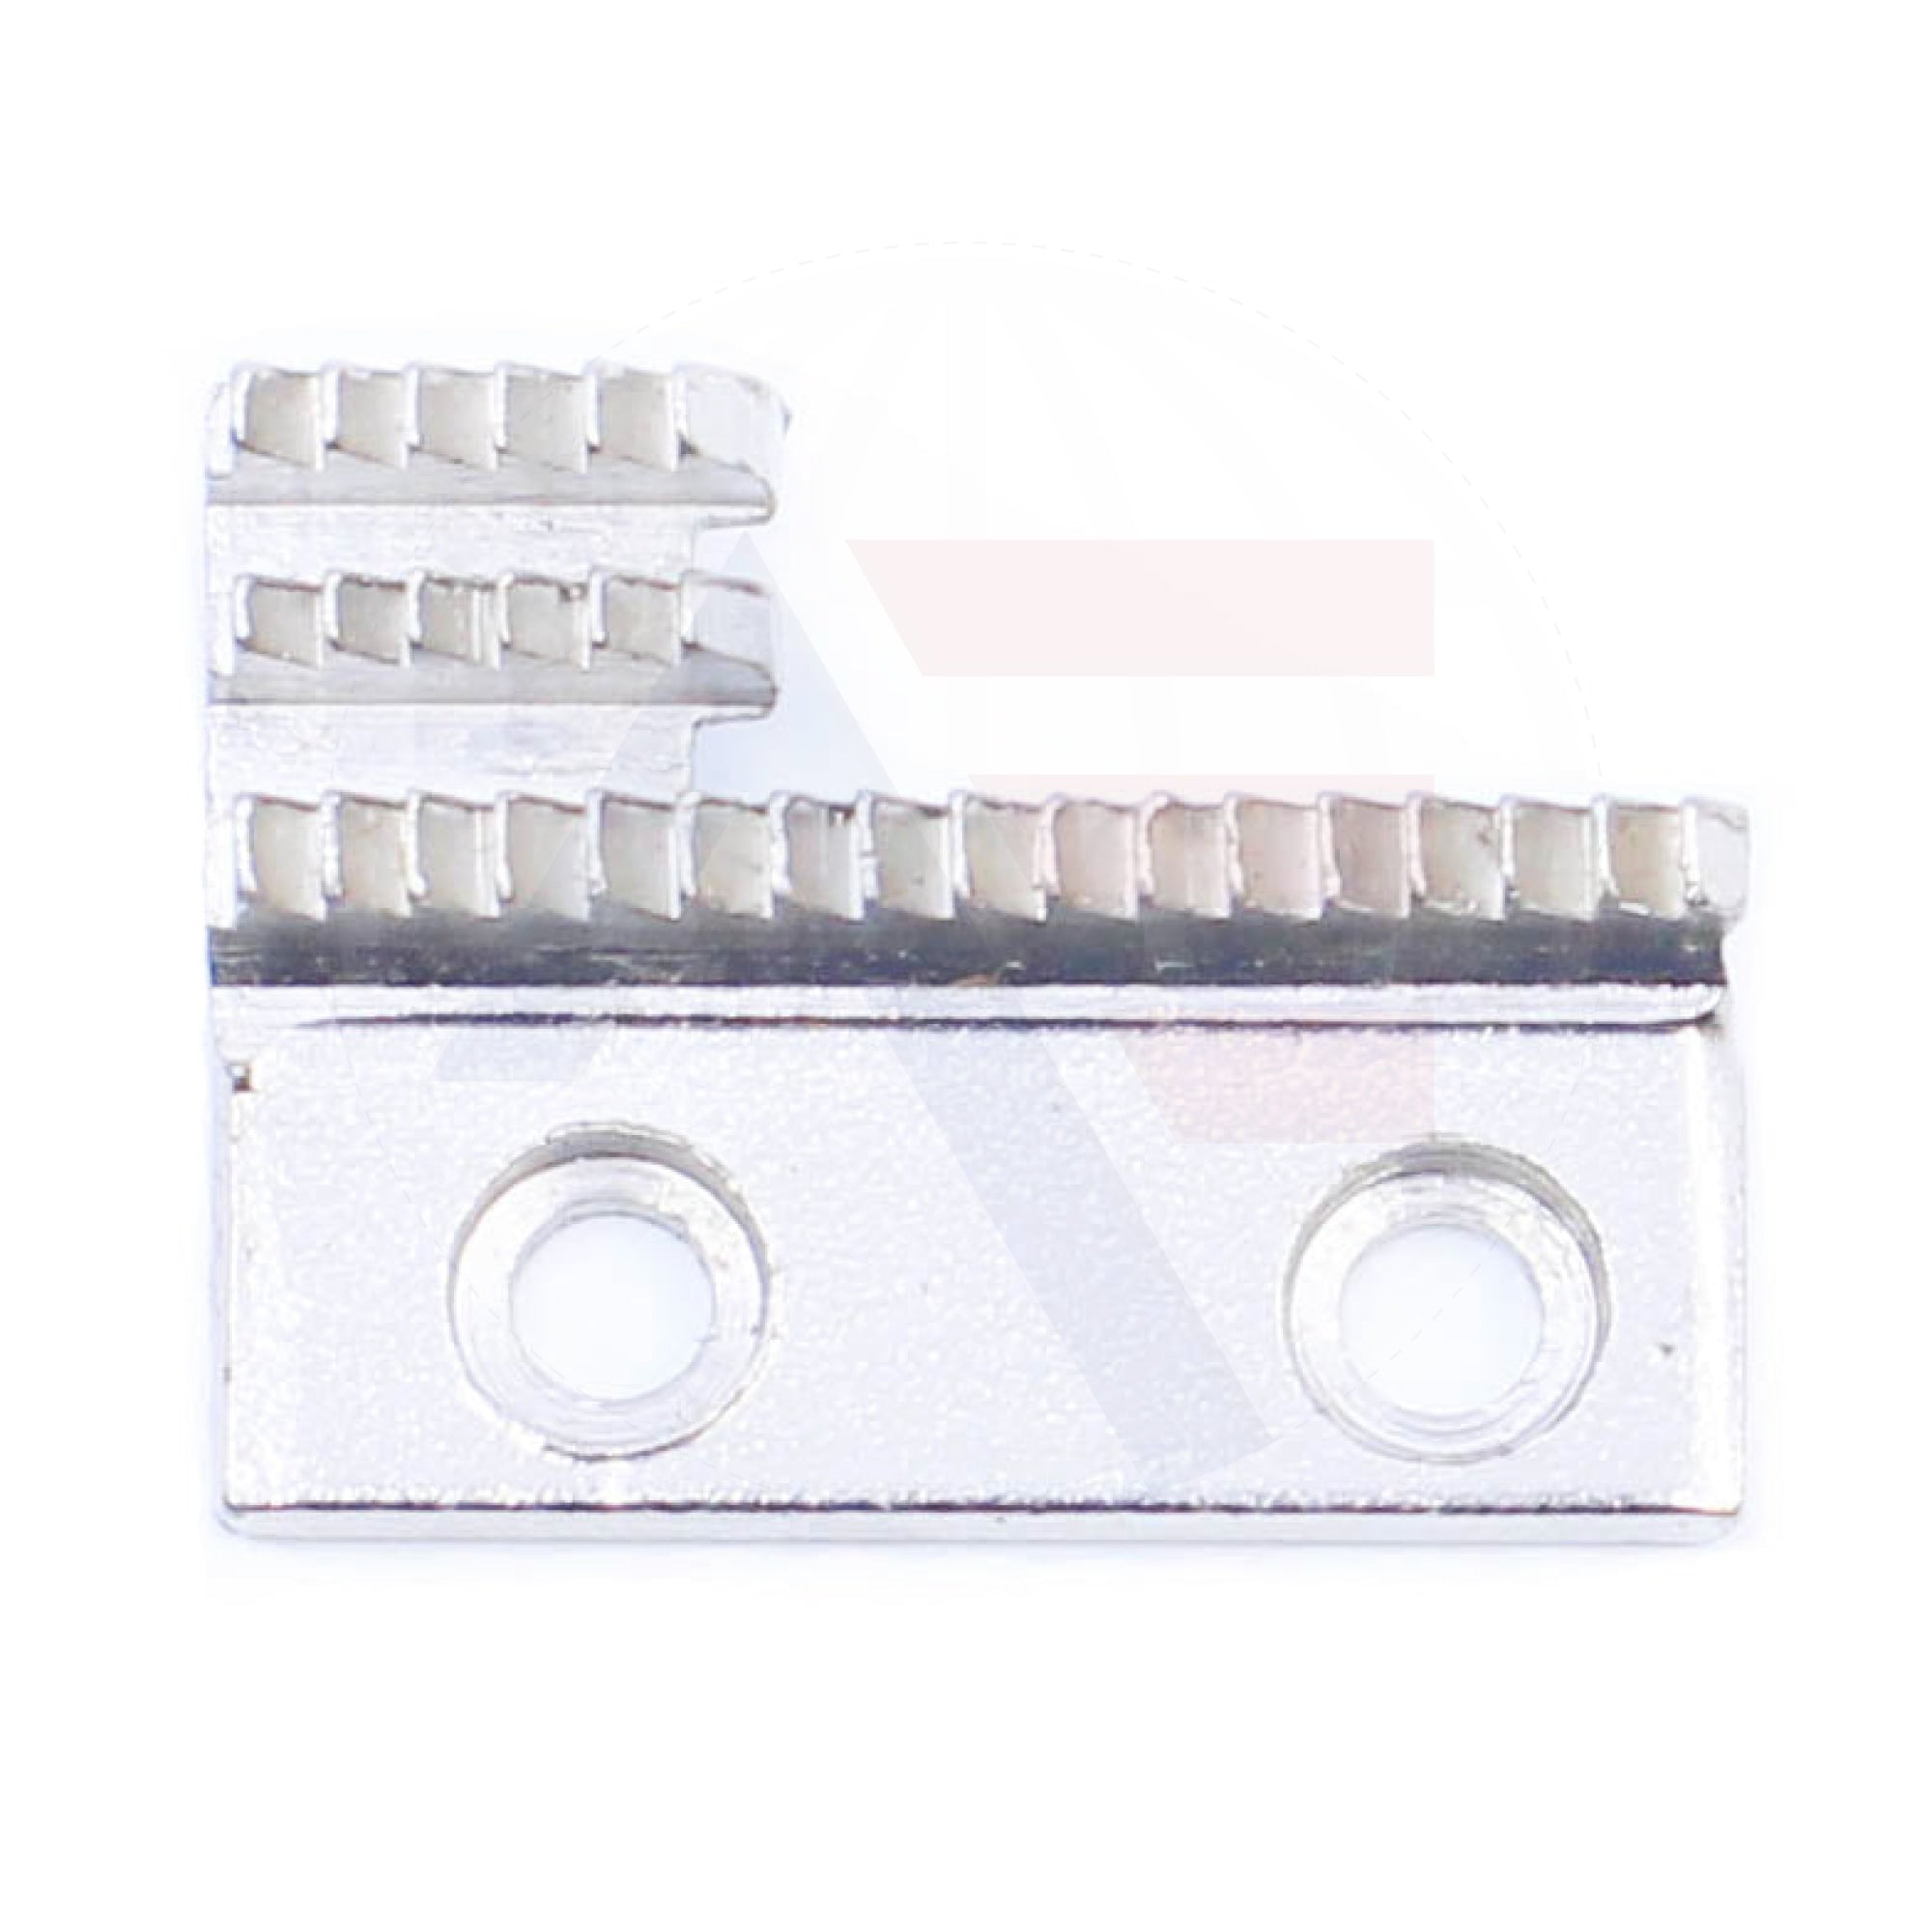 Cf464 Feed Dog Sewing Machine Spare Parts